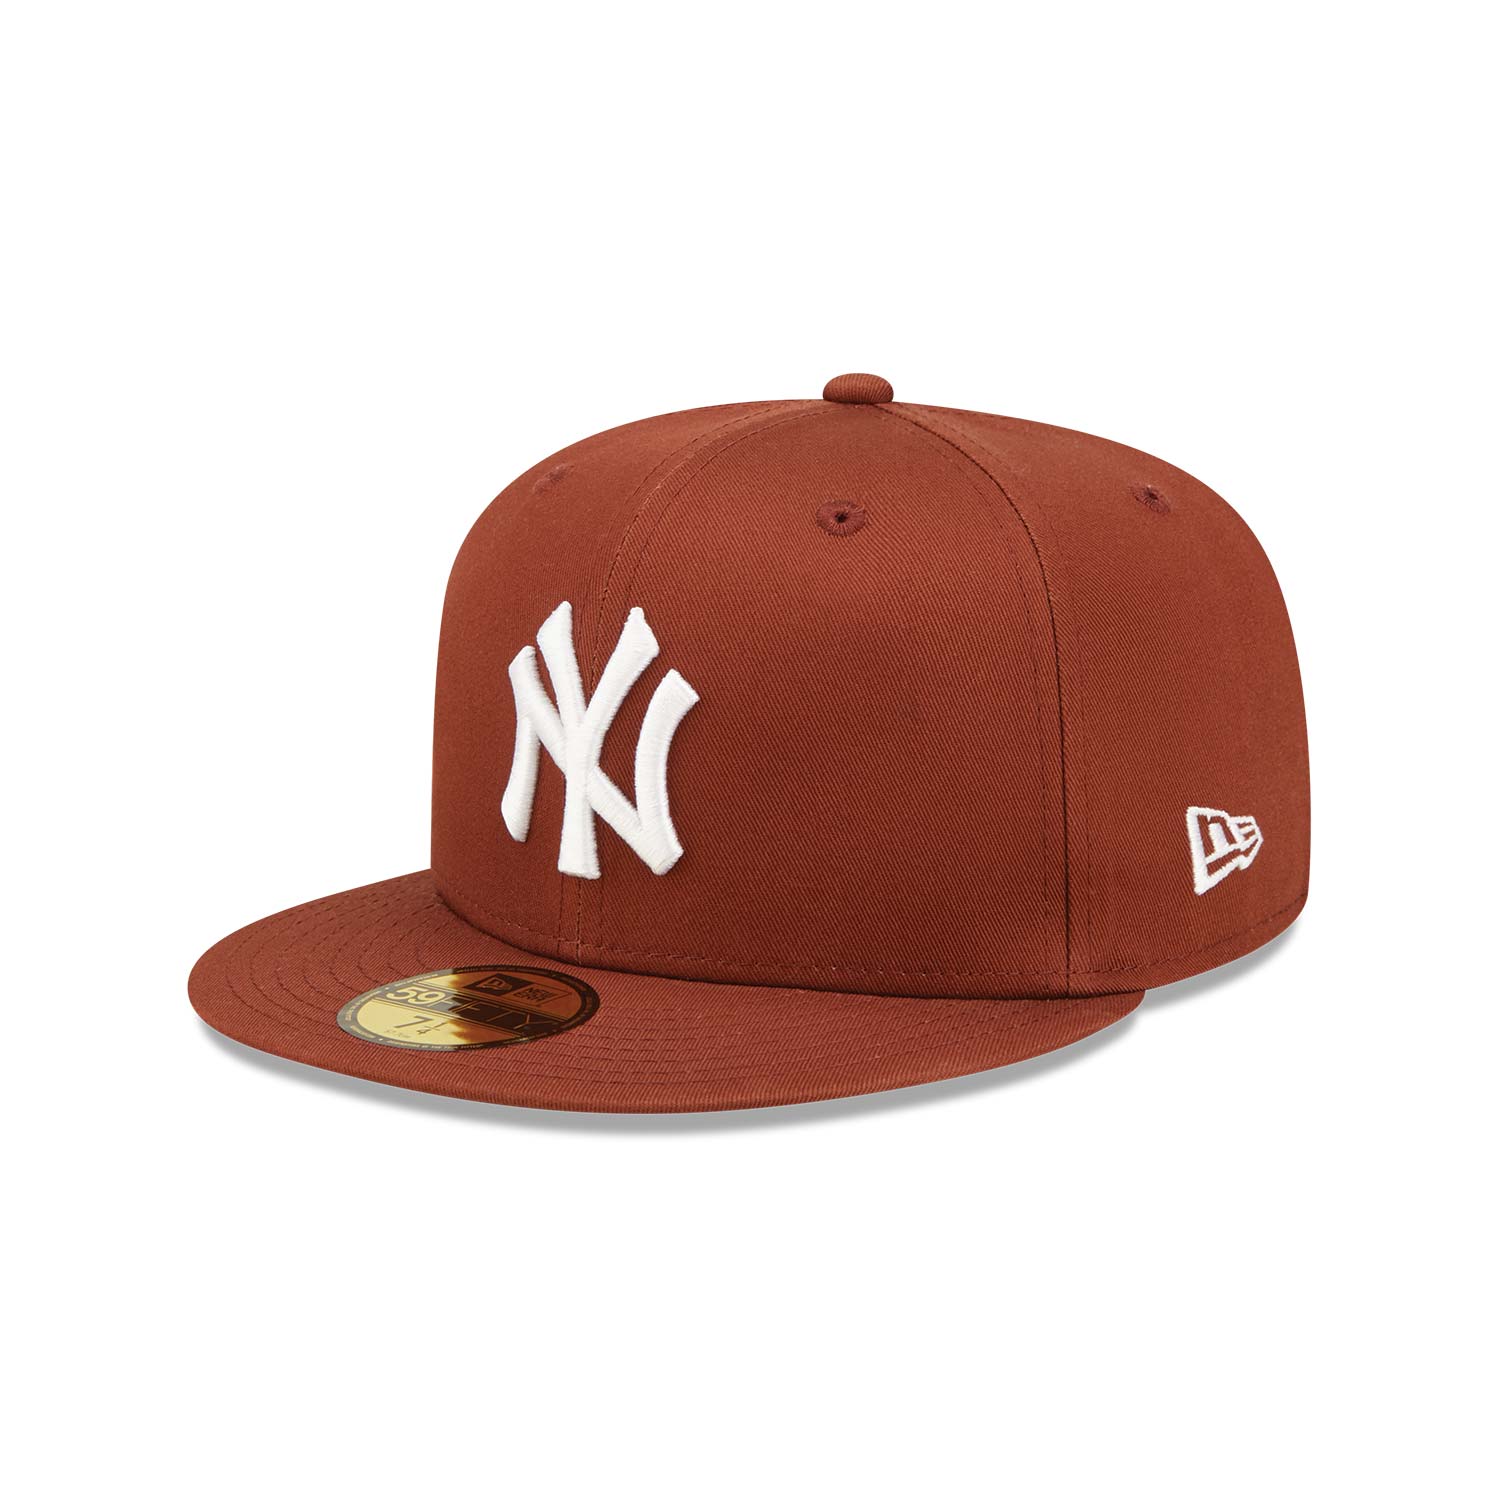 Official New Era New York Yankees Dark Brown 59FIFTY Fitted Cap B8704 ...